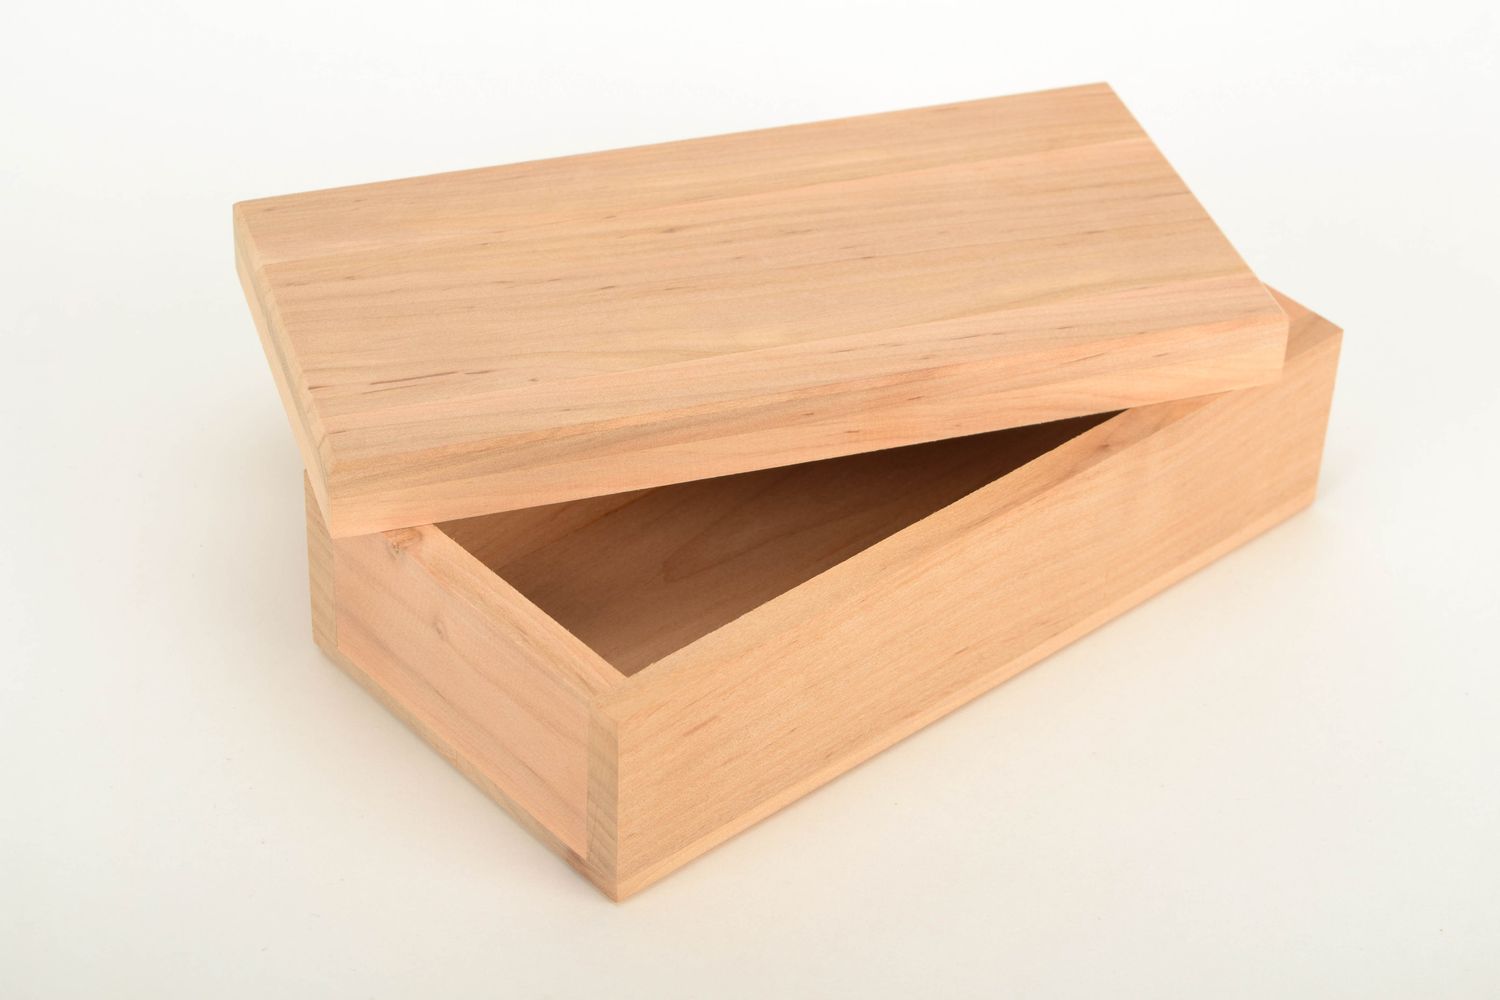 Alder wood craft blank for jewelry box photo 3